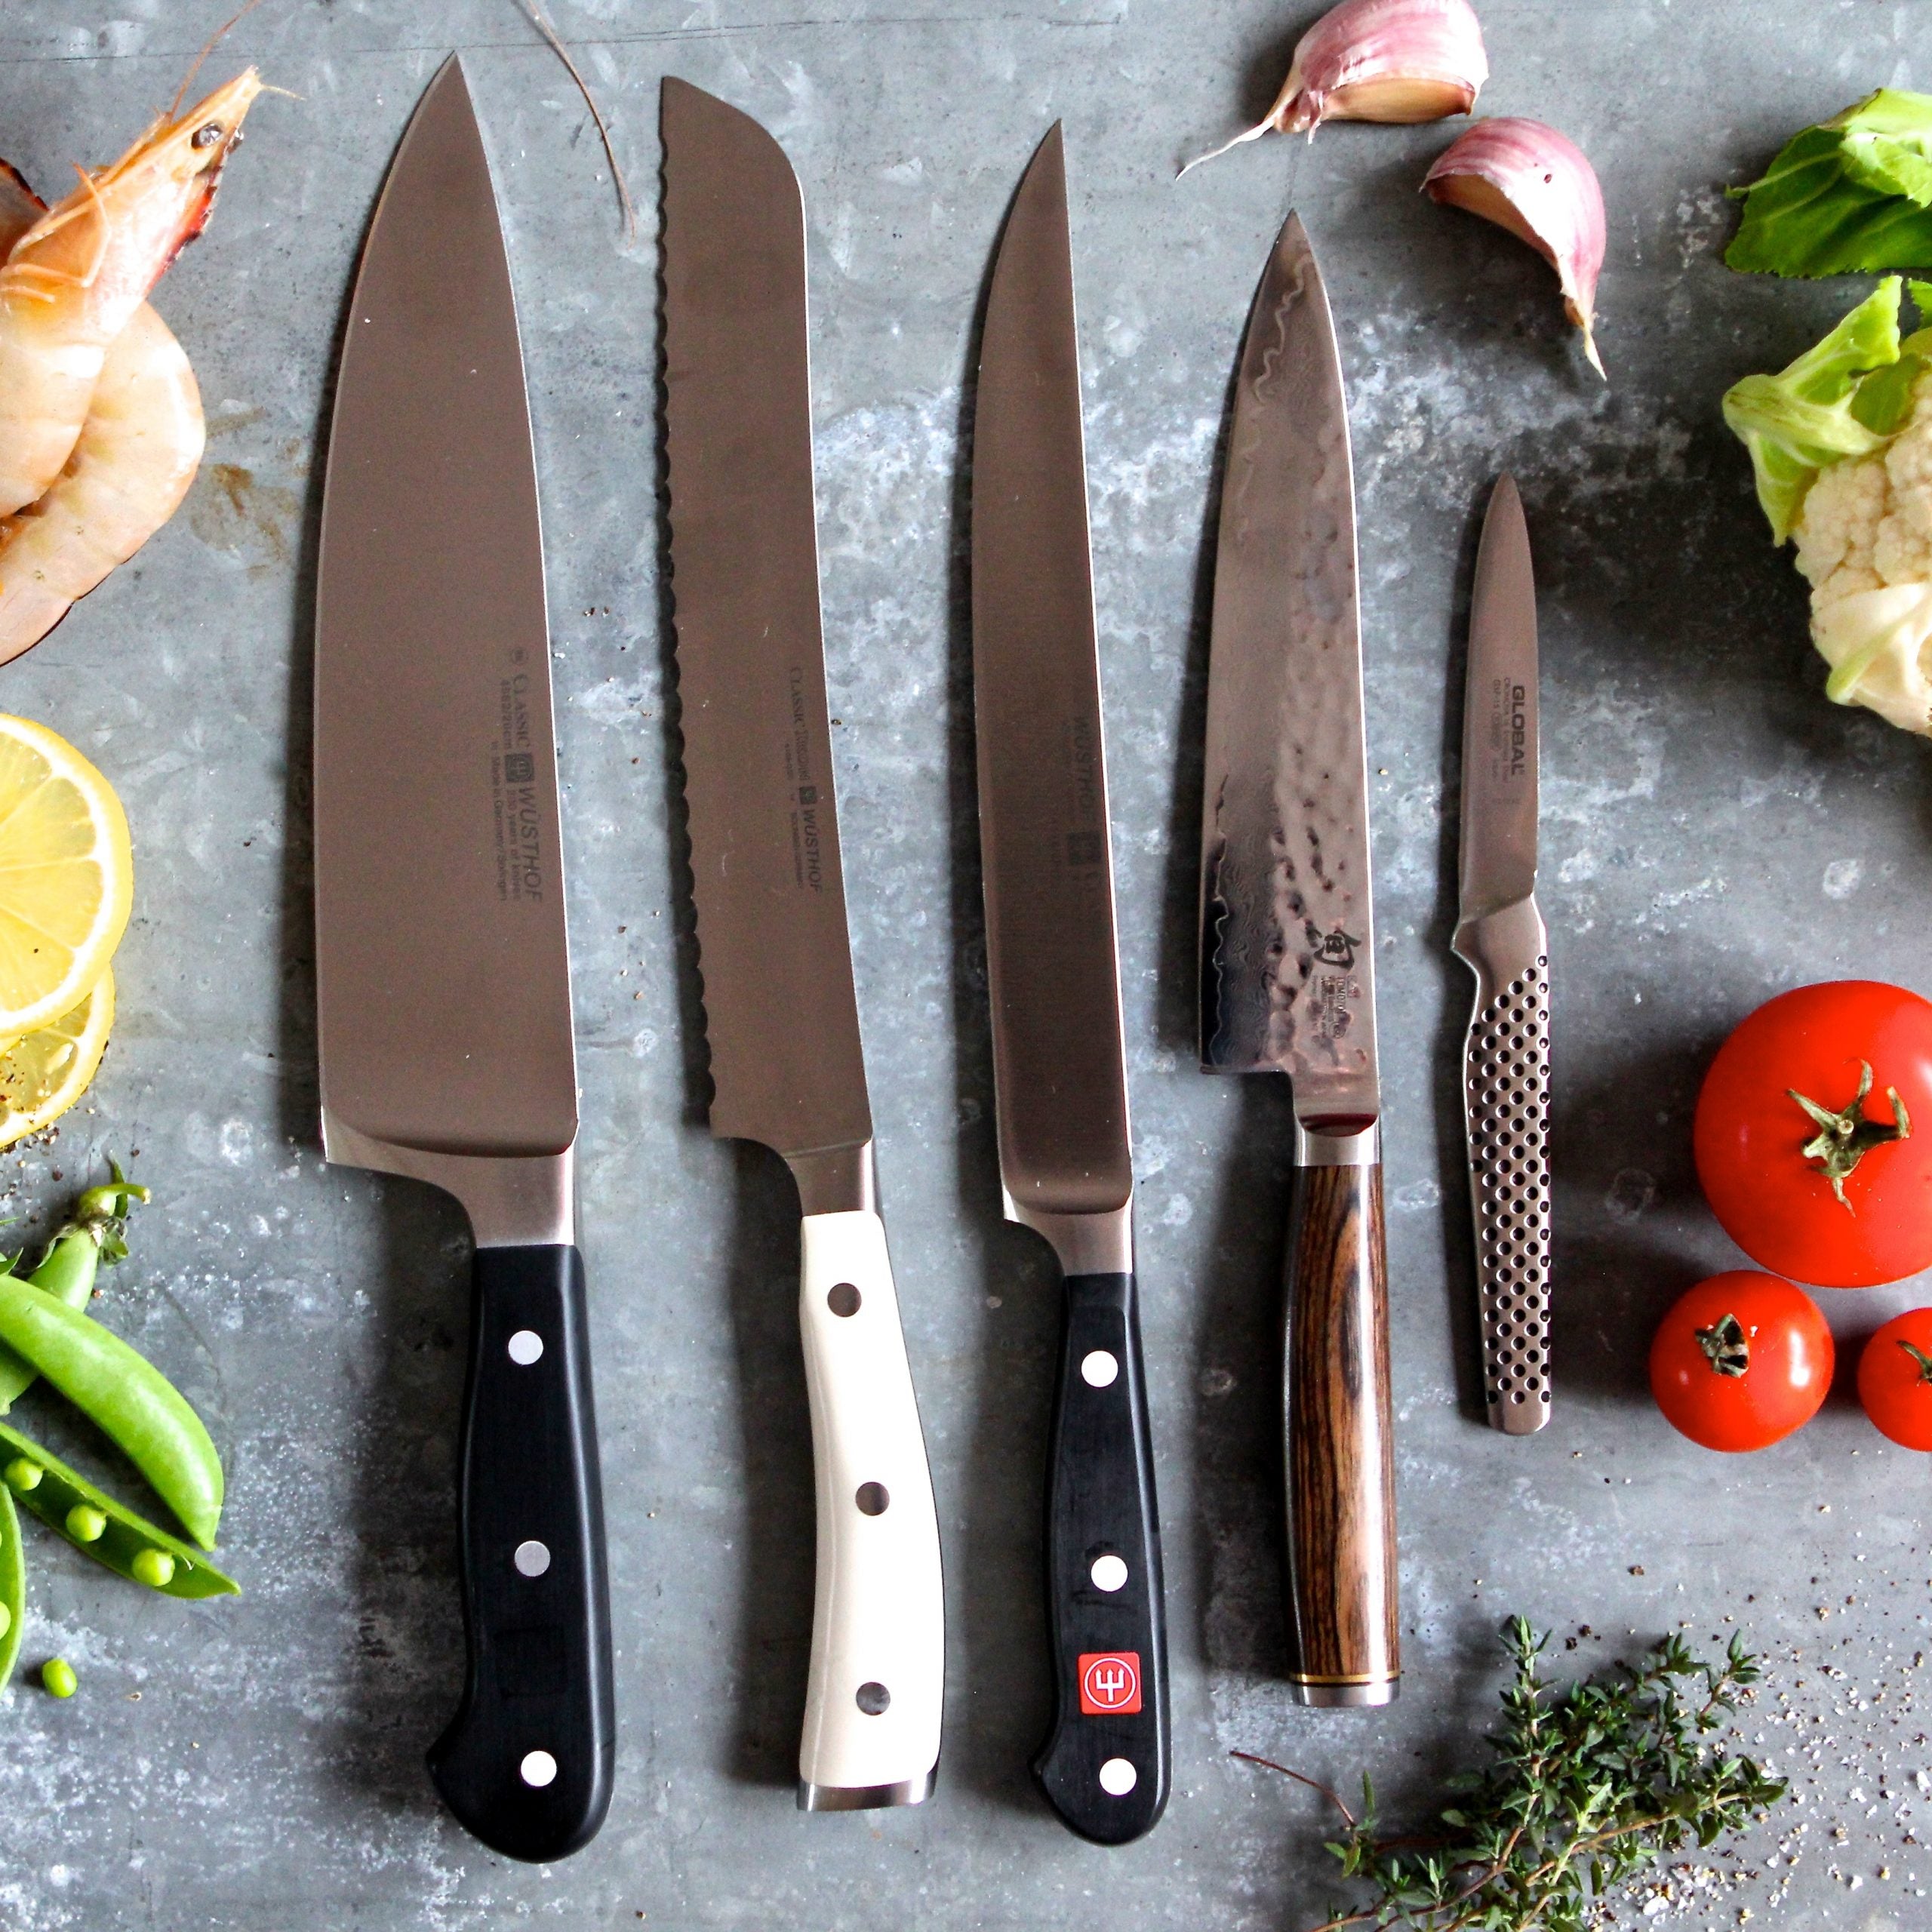 Essential Knives for Home Cooks from Chef's Knives to Cleavers